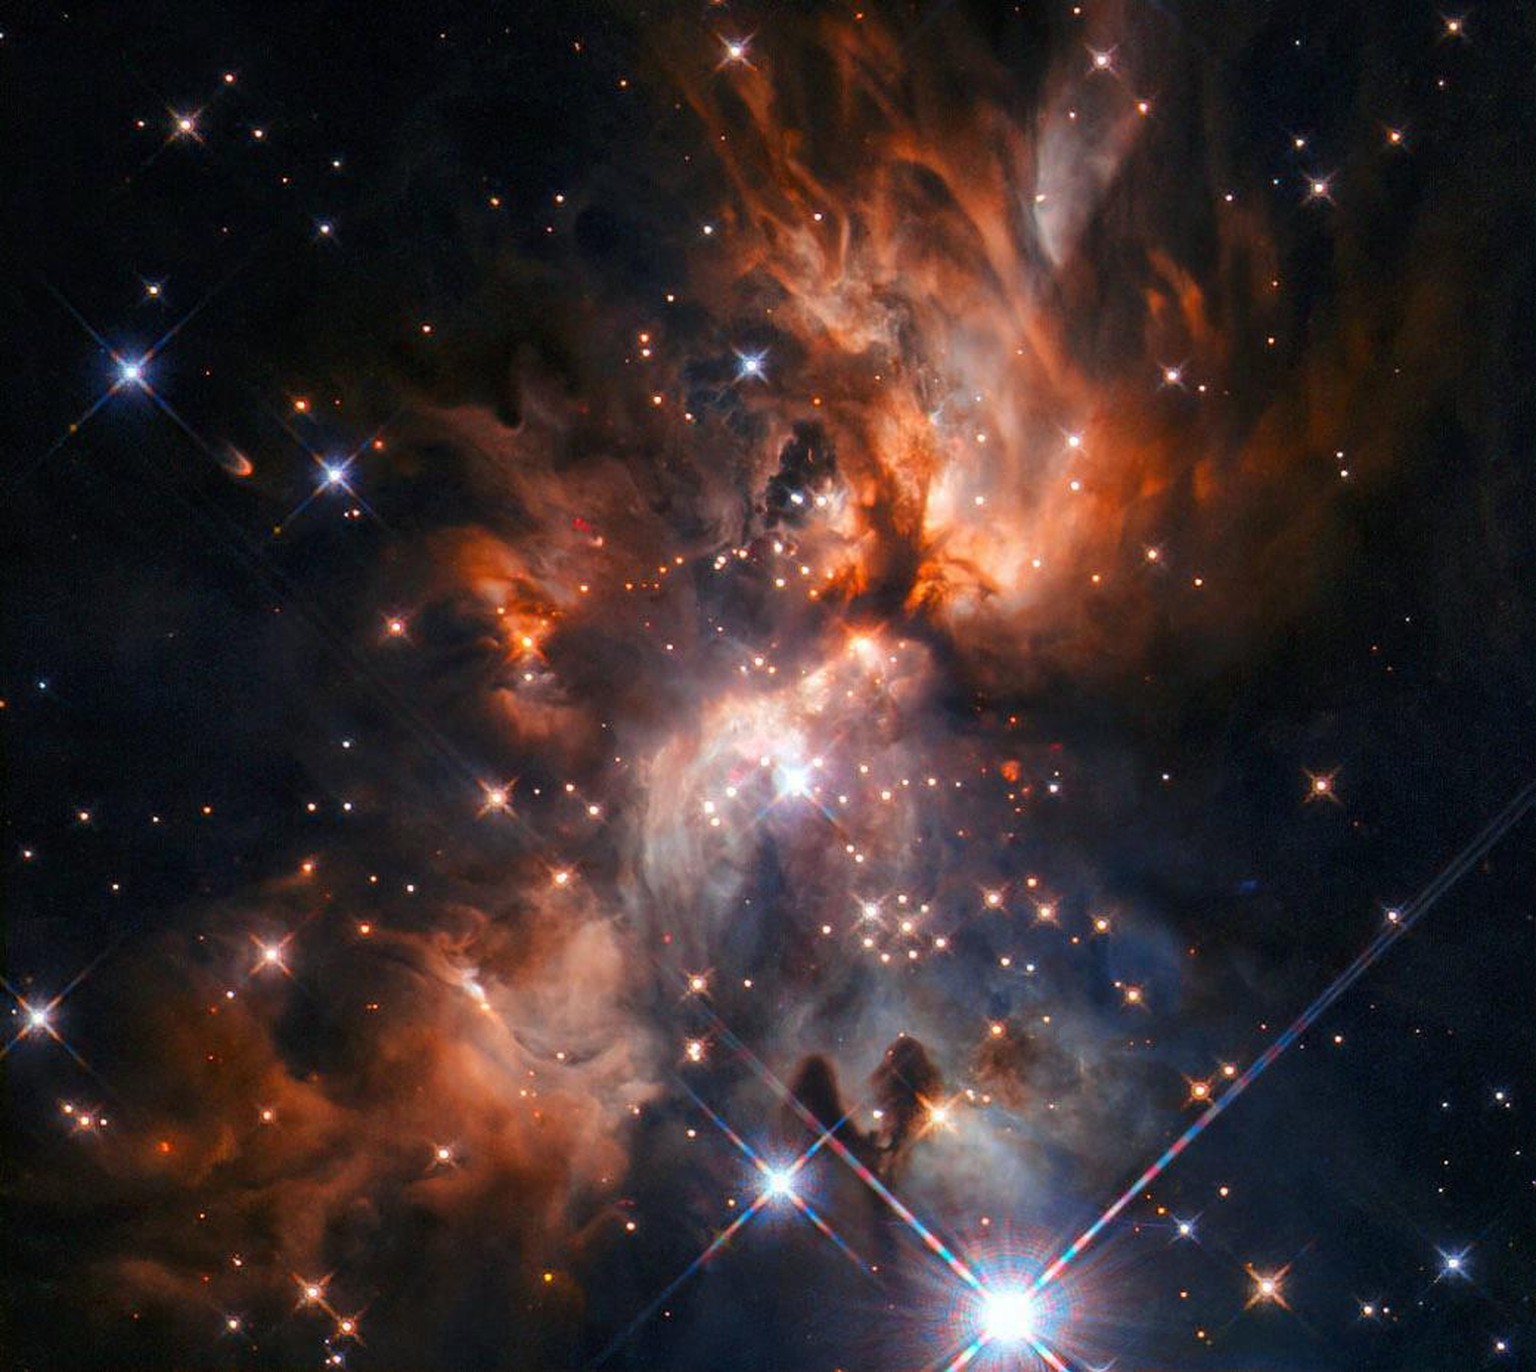 This image from the NASA/ESA Hubble Space Telescope features AFGL 5180, a beautiful stellar nursery located in the constellation of Gemini (the Twins). 
https://www.nasa.gov/image-feature/goddard/2021 ...